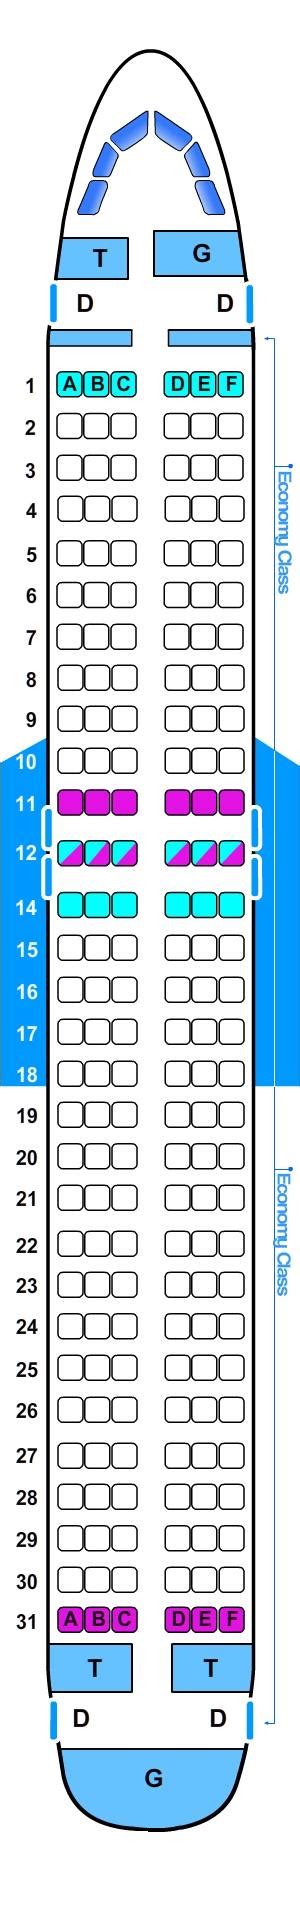 Delta Airbus A320 Seat Map